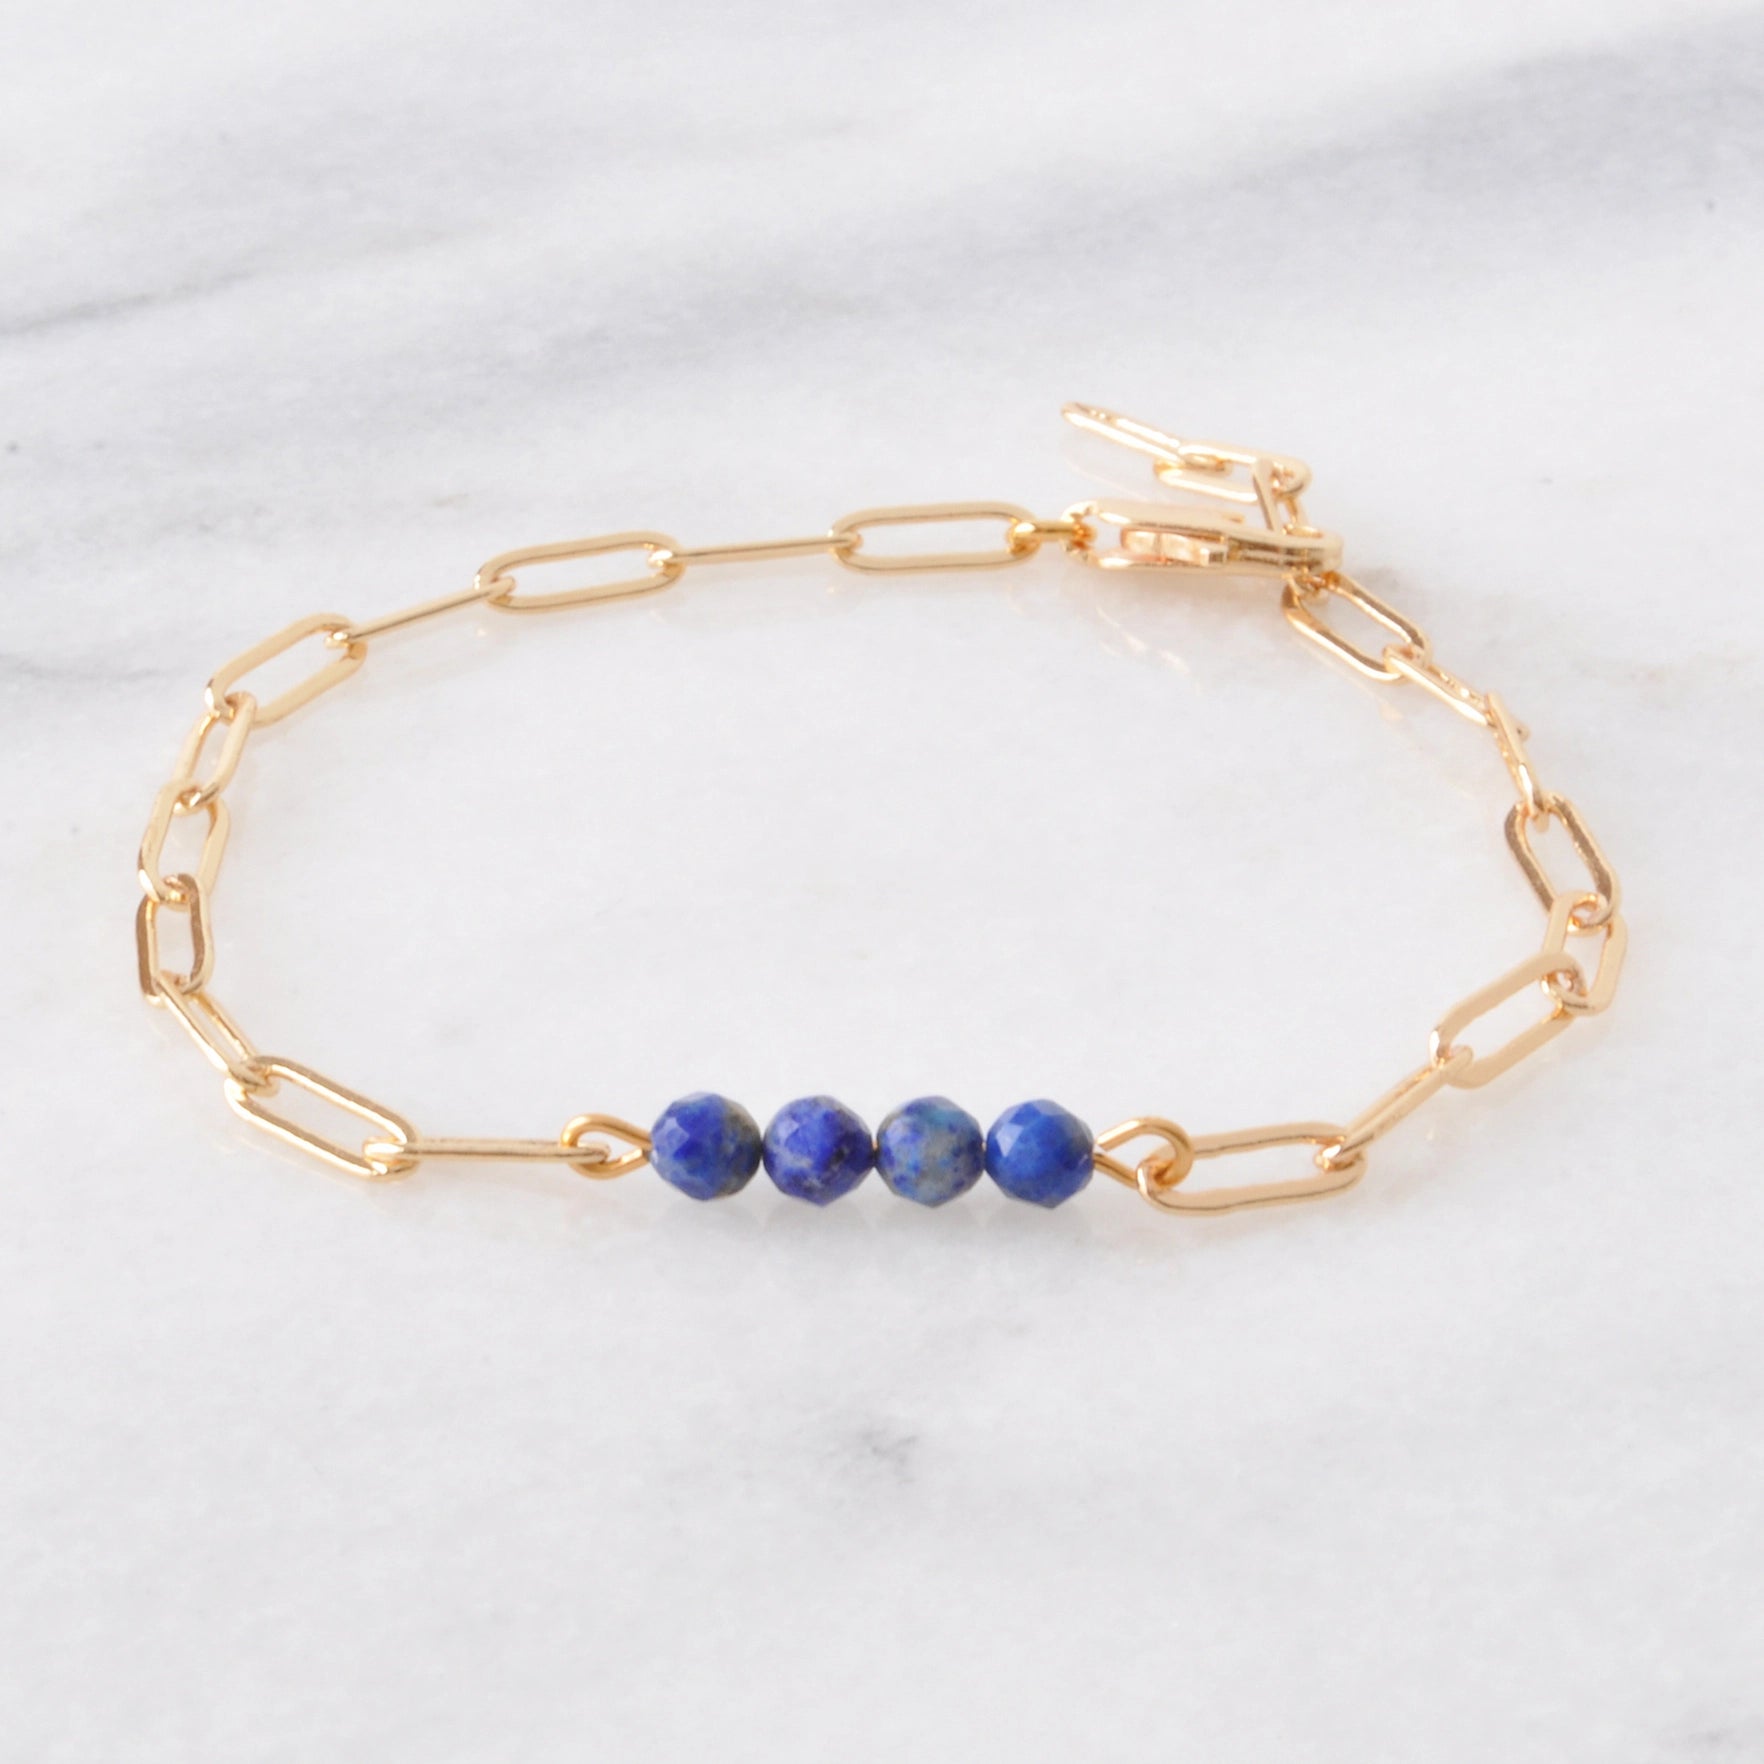 Libby And Smee Gemstone Paper Clip Chain Link Bracelet - Blue Lapis